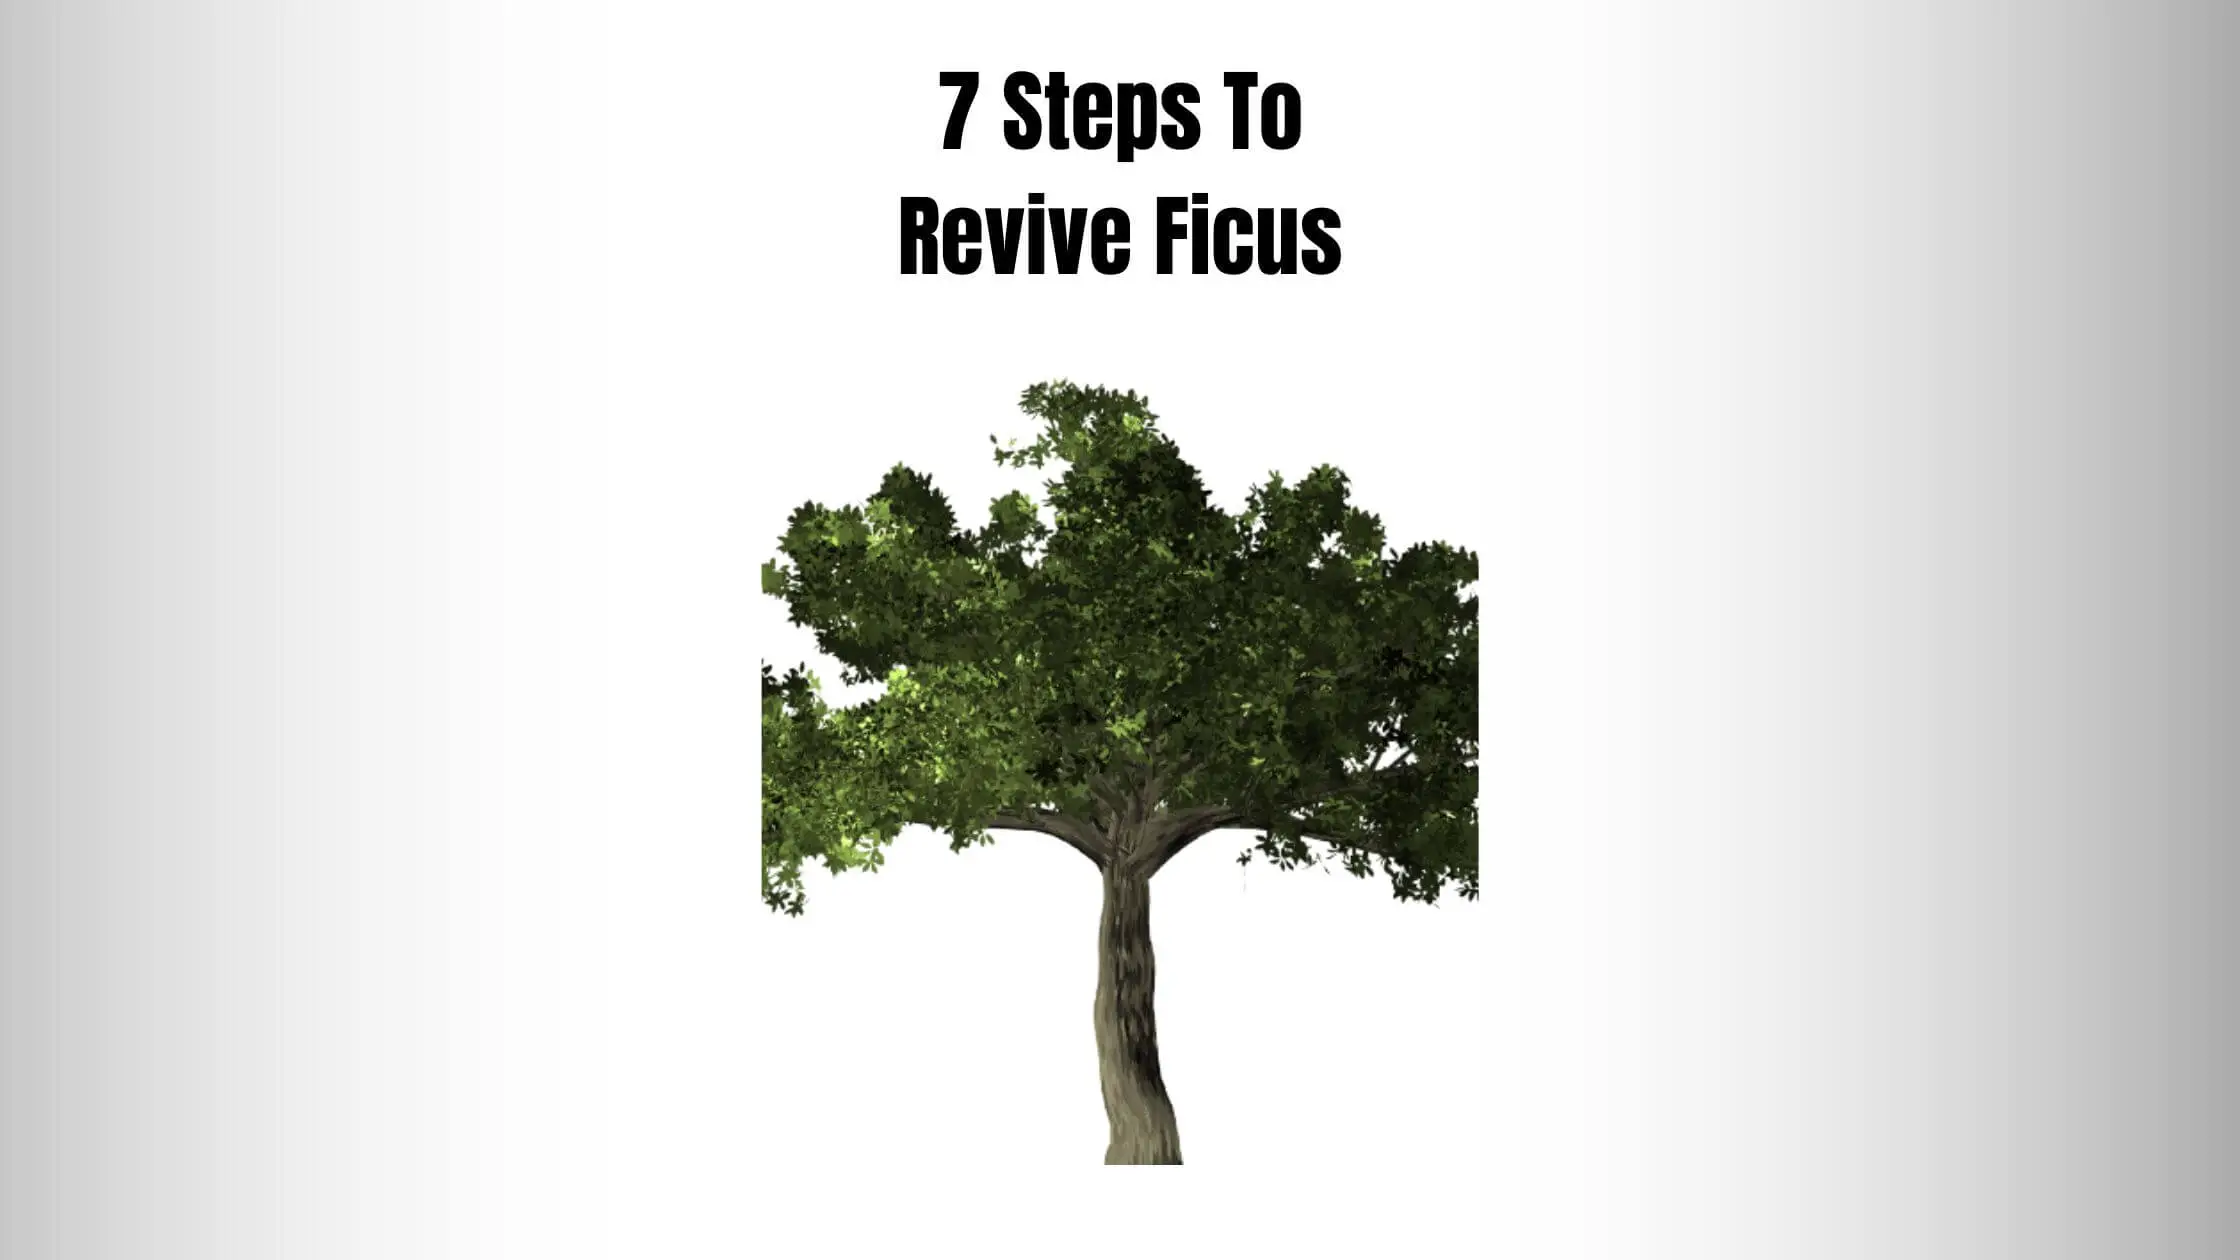 7 Steps To Revive Ficus